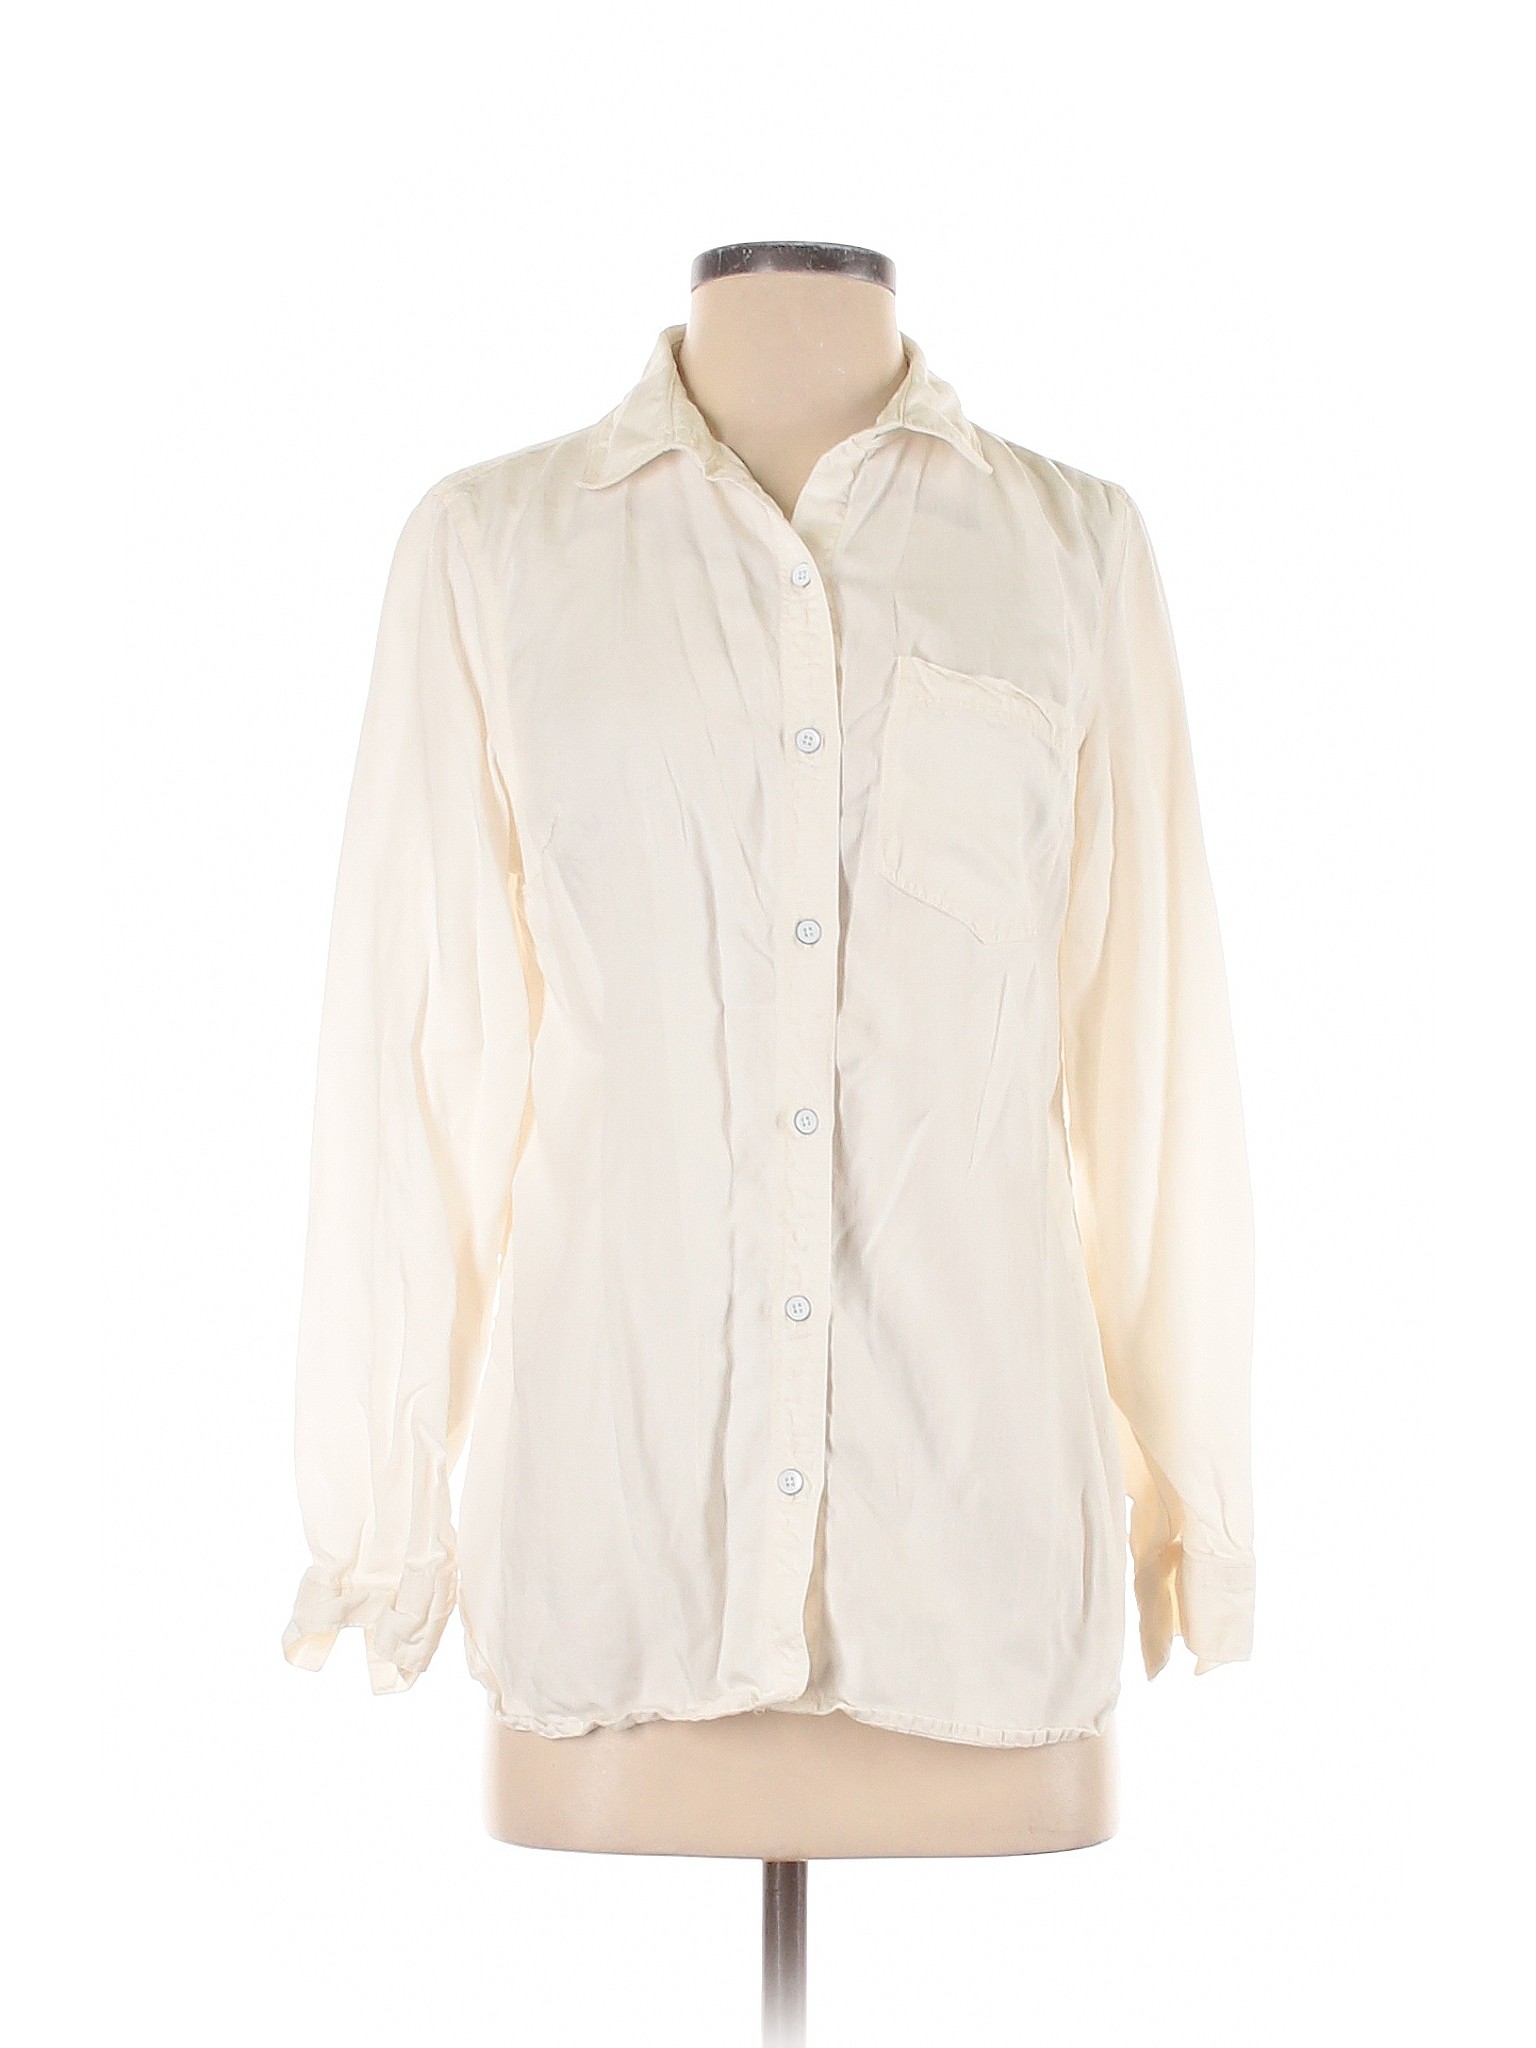 Old Navy Women Ivory Long Sleeve Button-Down Shirt S | eBay